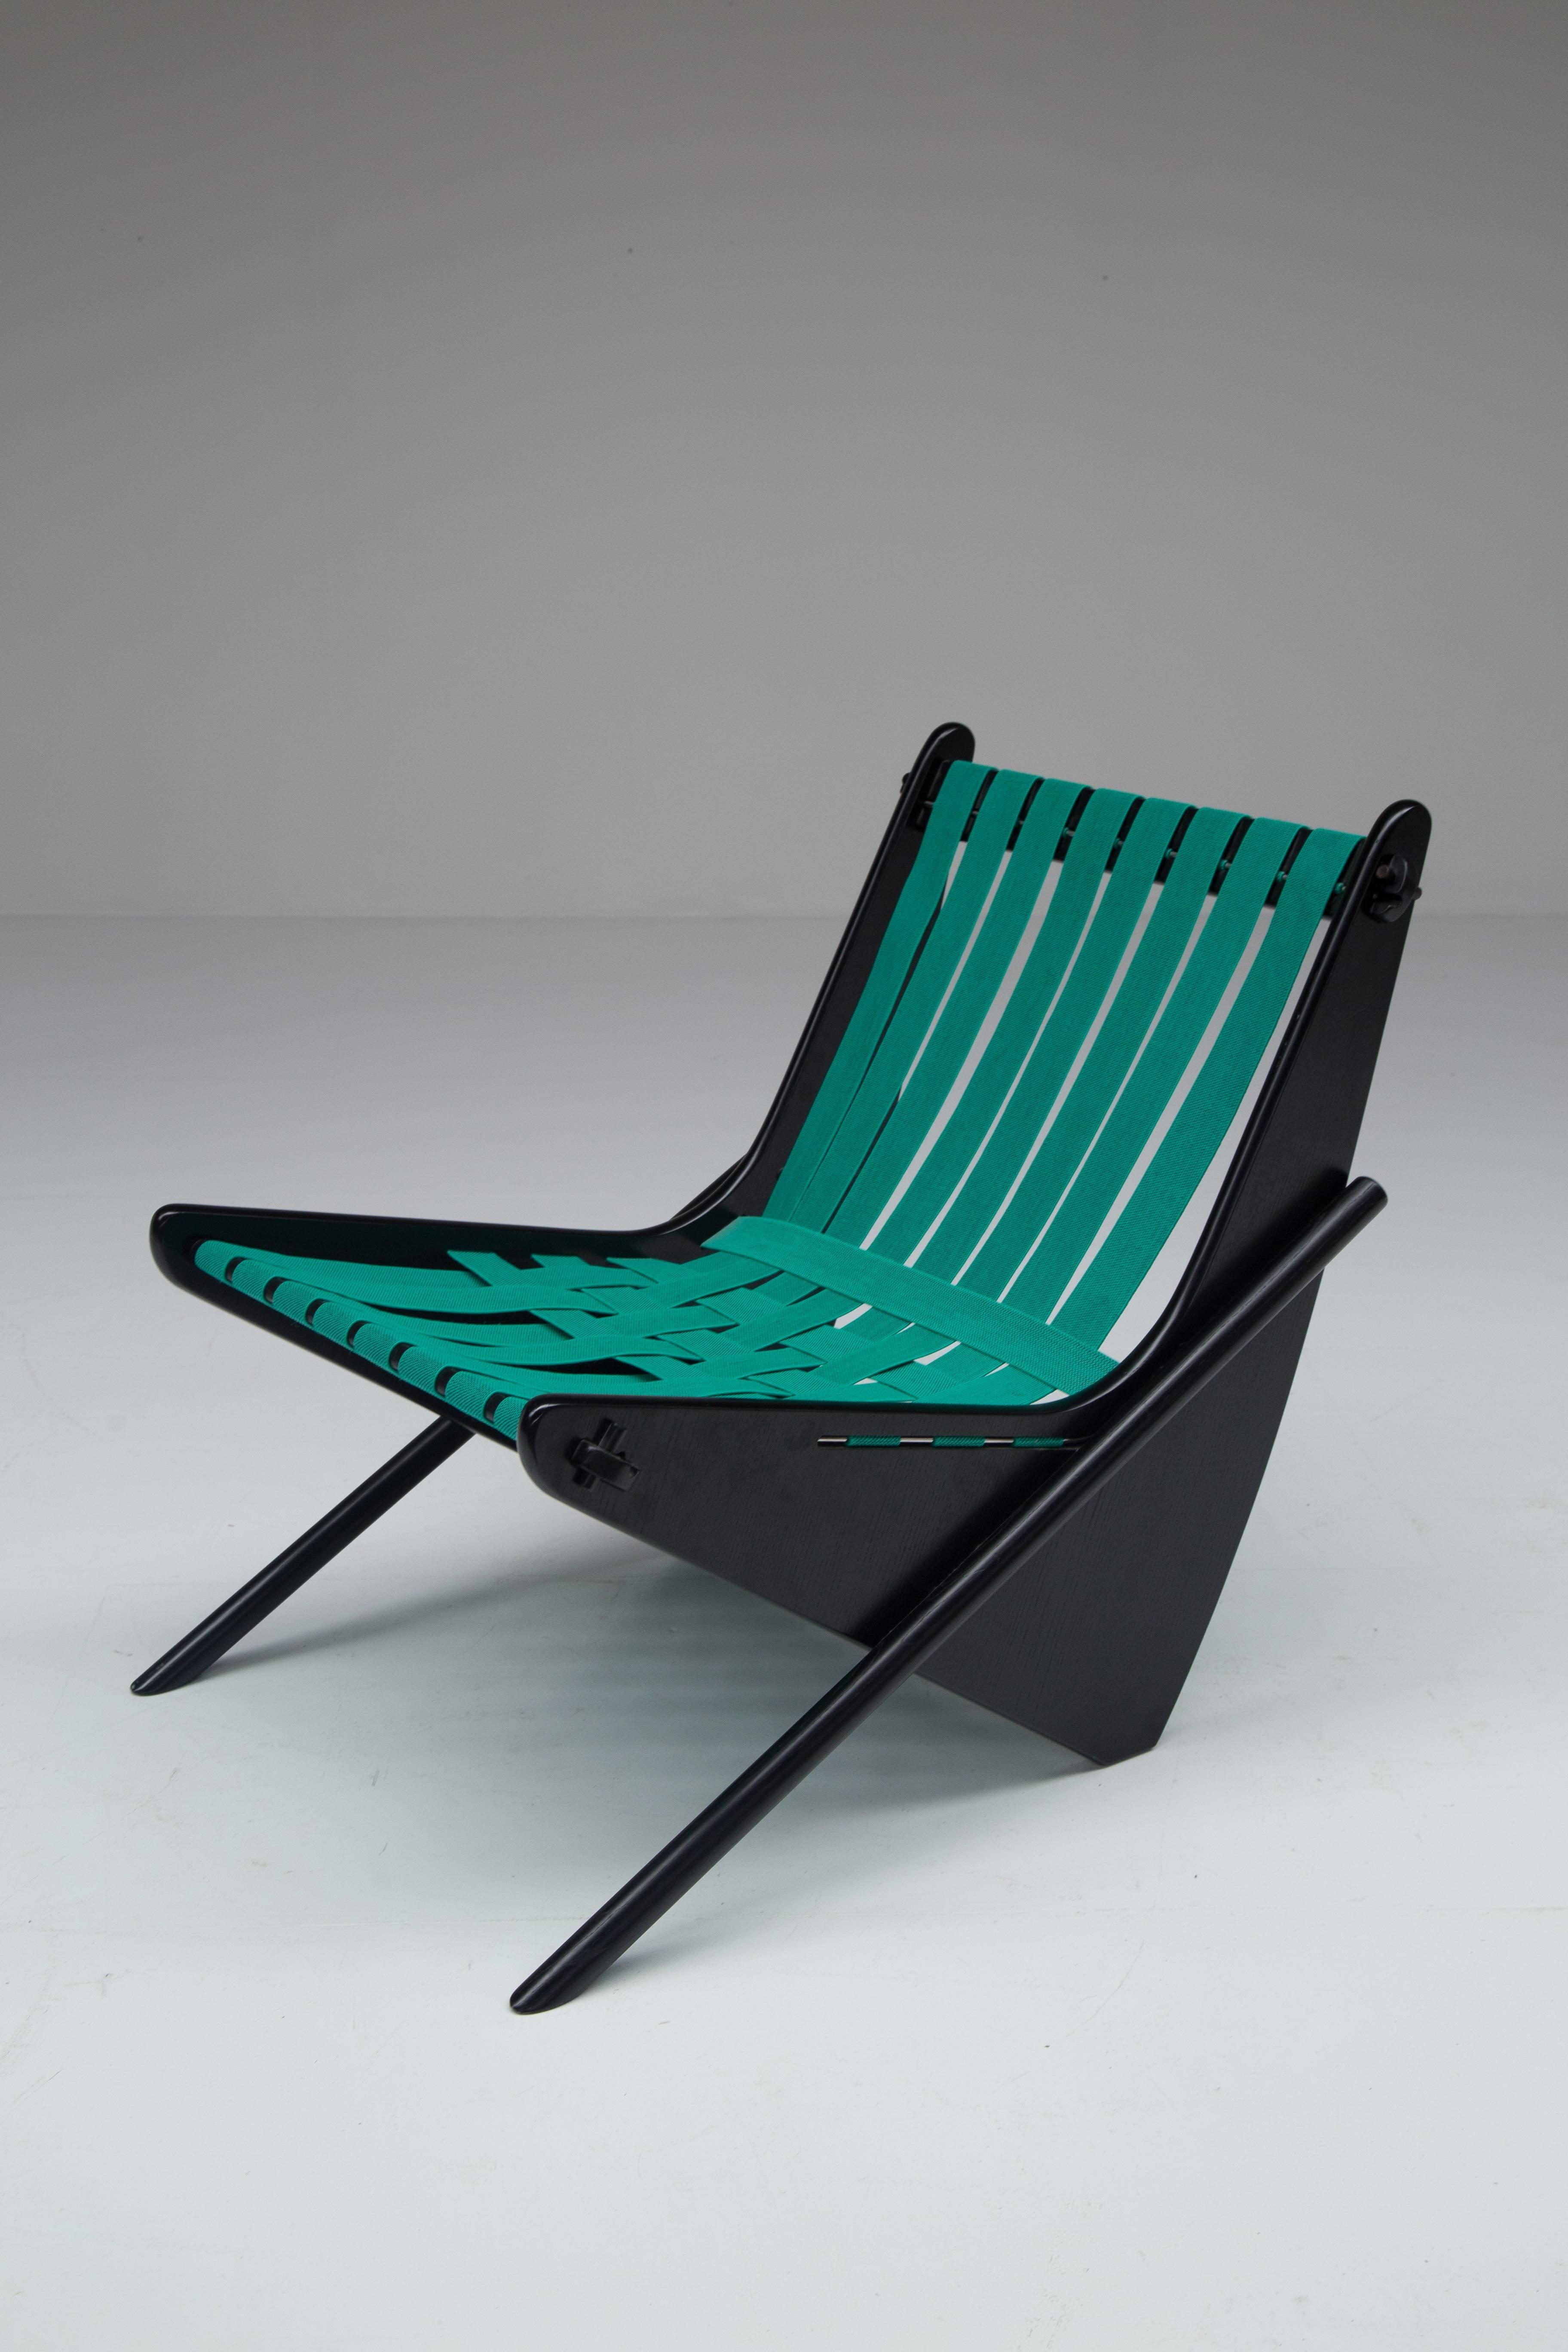 Rare comfortable easy chair designed by Neutra in 1940s and edited by Italian company SRL for the European market in the 1980s.